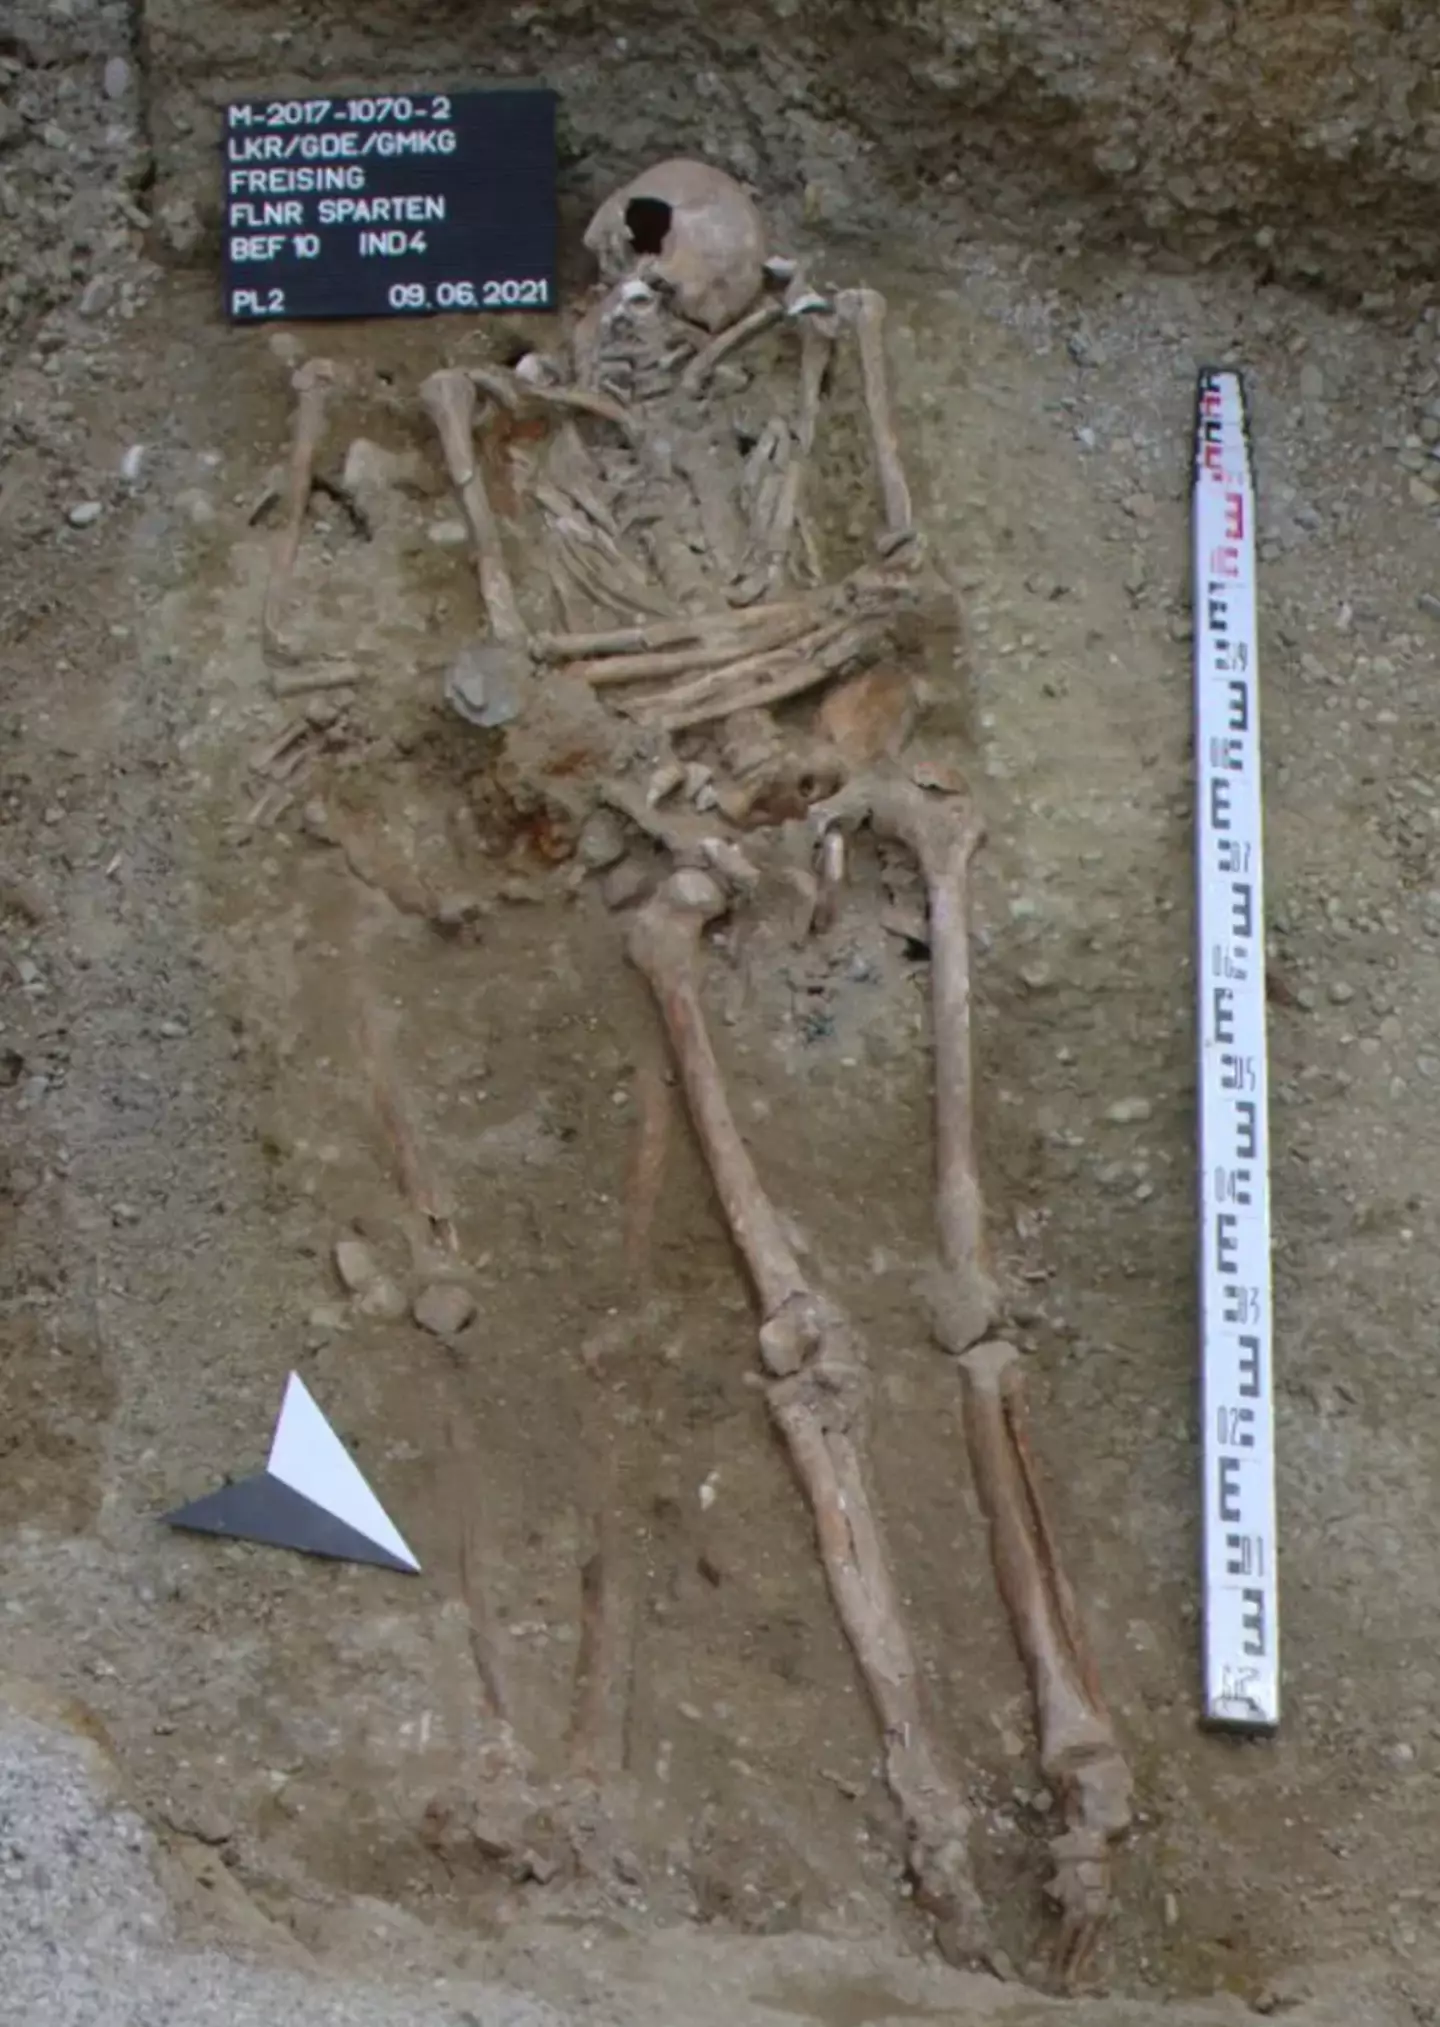 The skeleton was discovered in Freising.